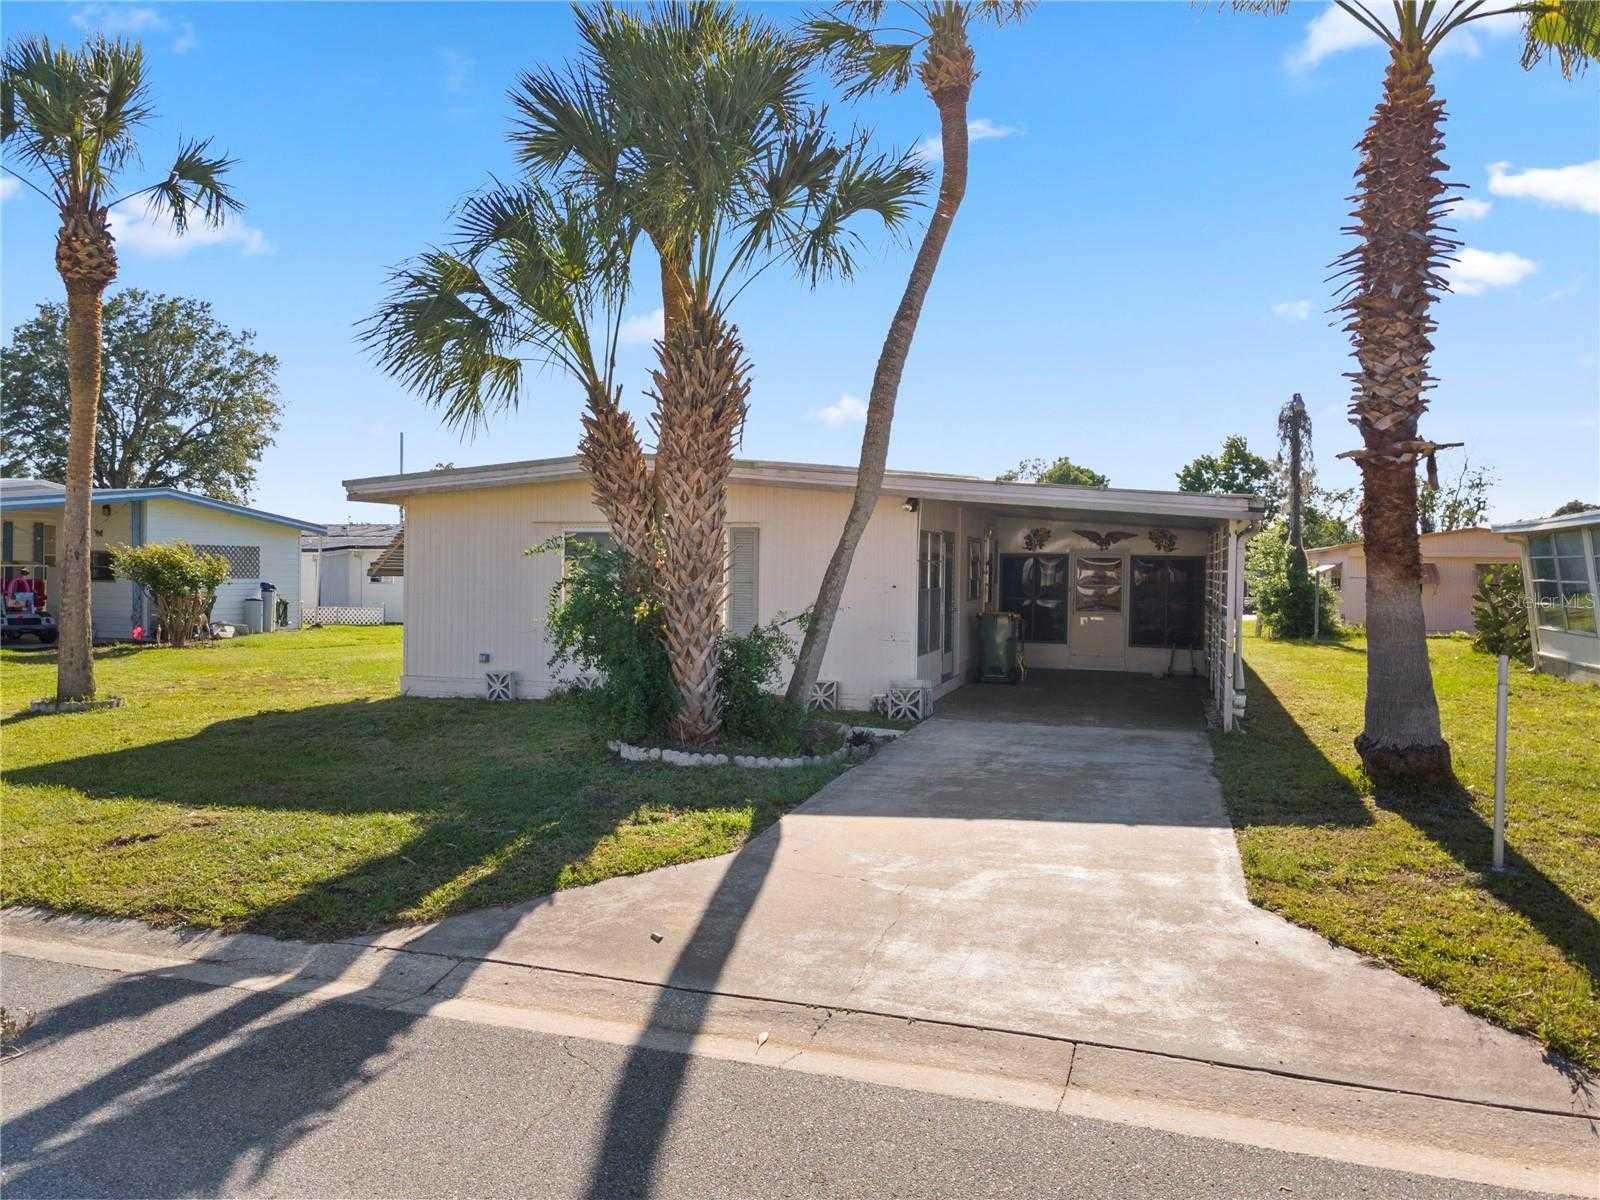 617 COACHWOOD CENTRAL, LEESBURG, Mobile Home - Pre 1976,  for sale, The Mount Dora Group 